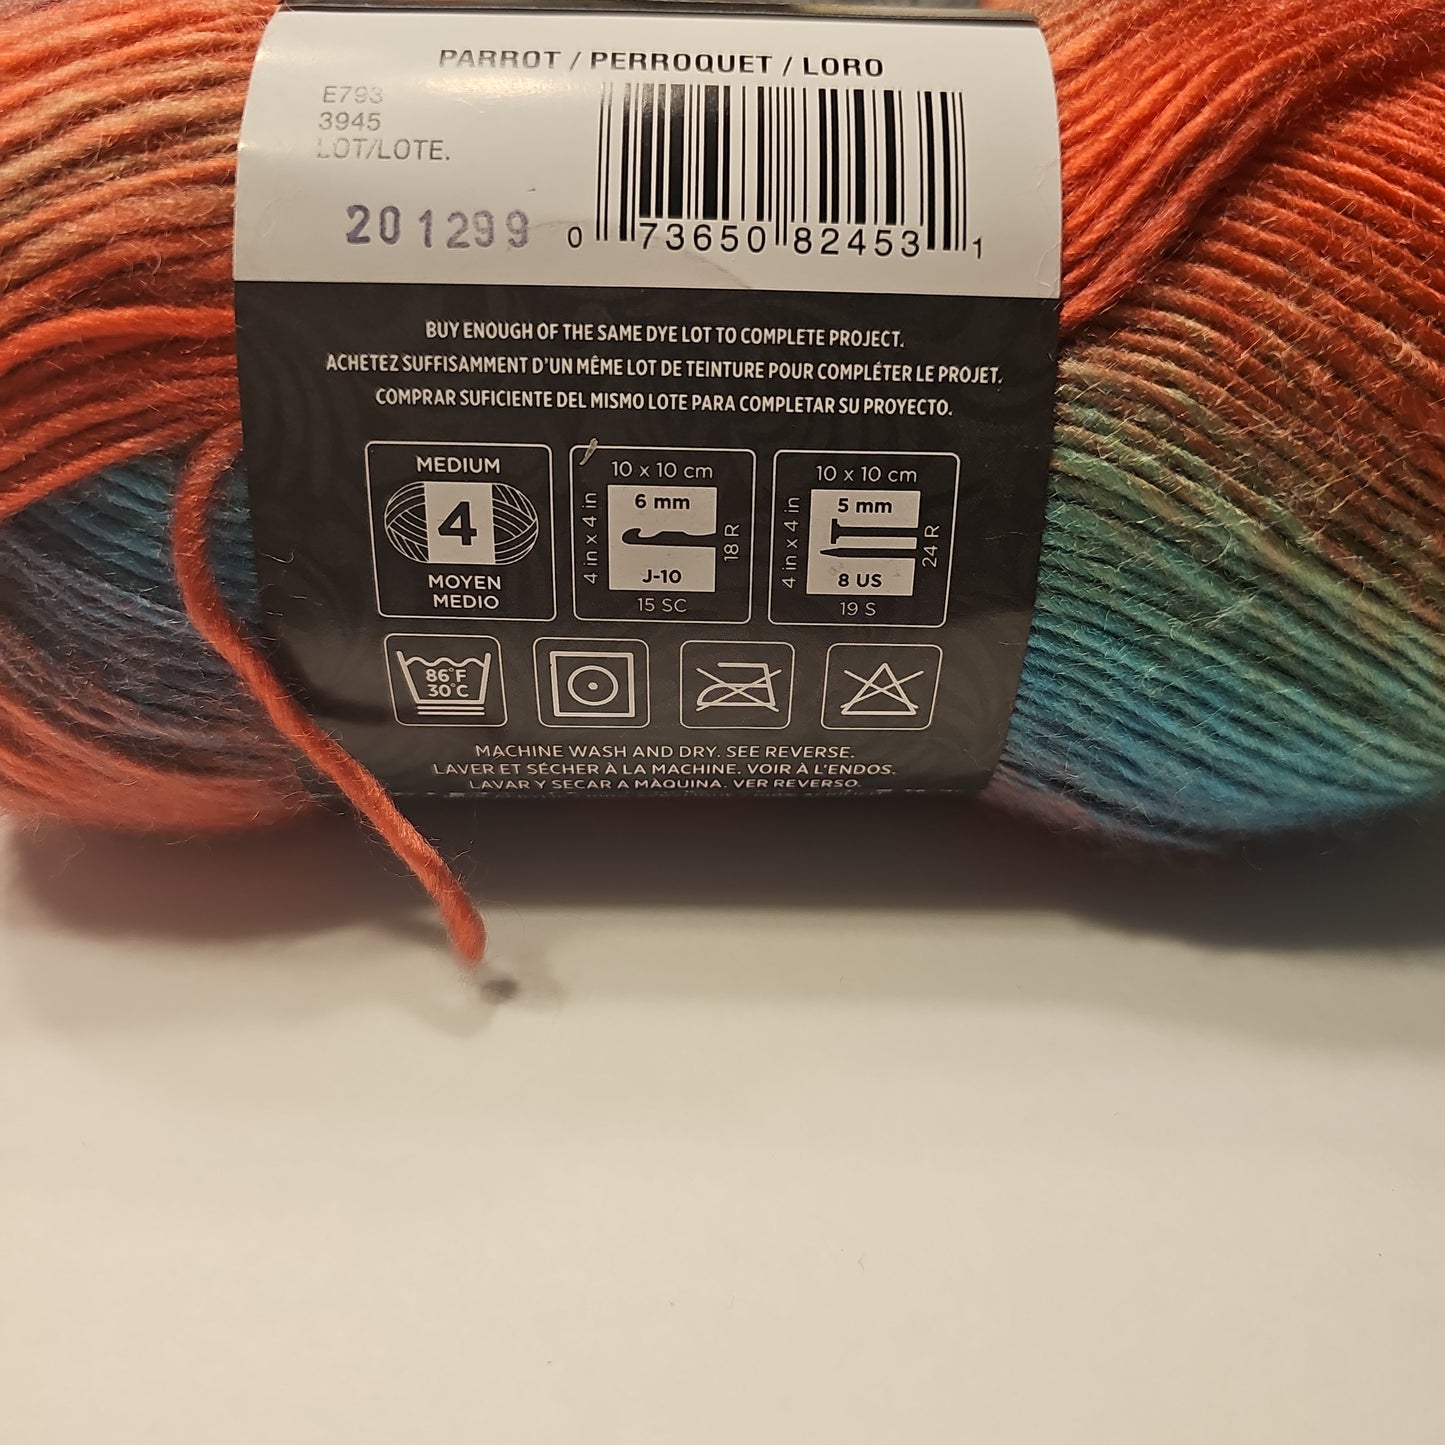 Red Heart Unforgettable Parrot Yarn *Lot of 2 Skeins*